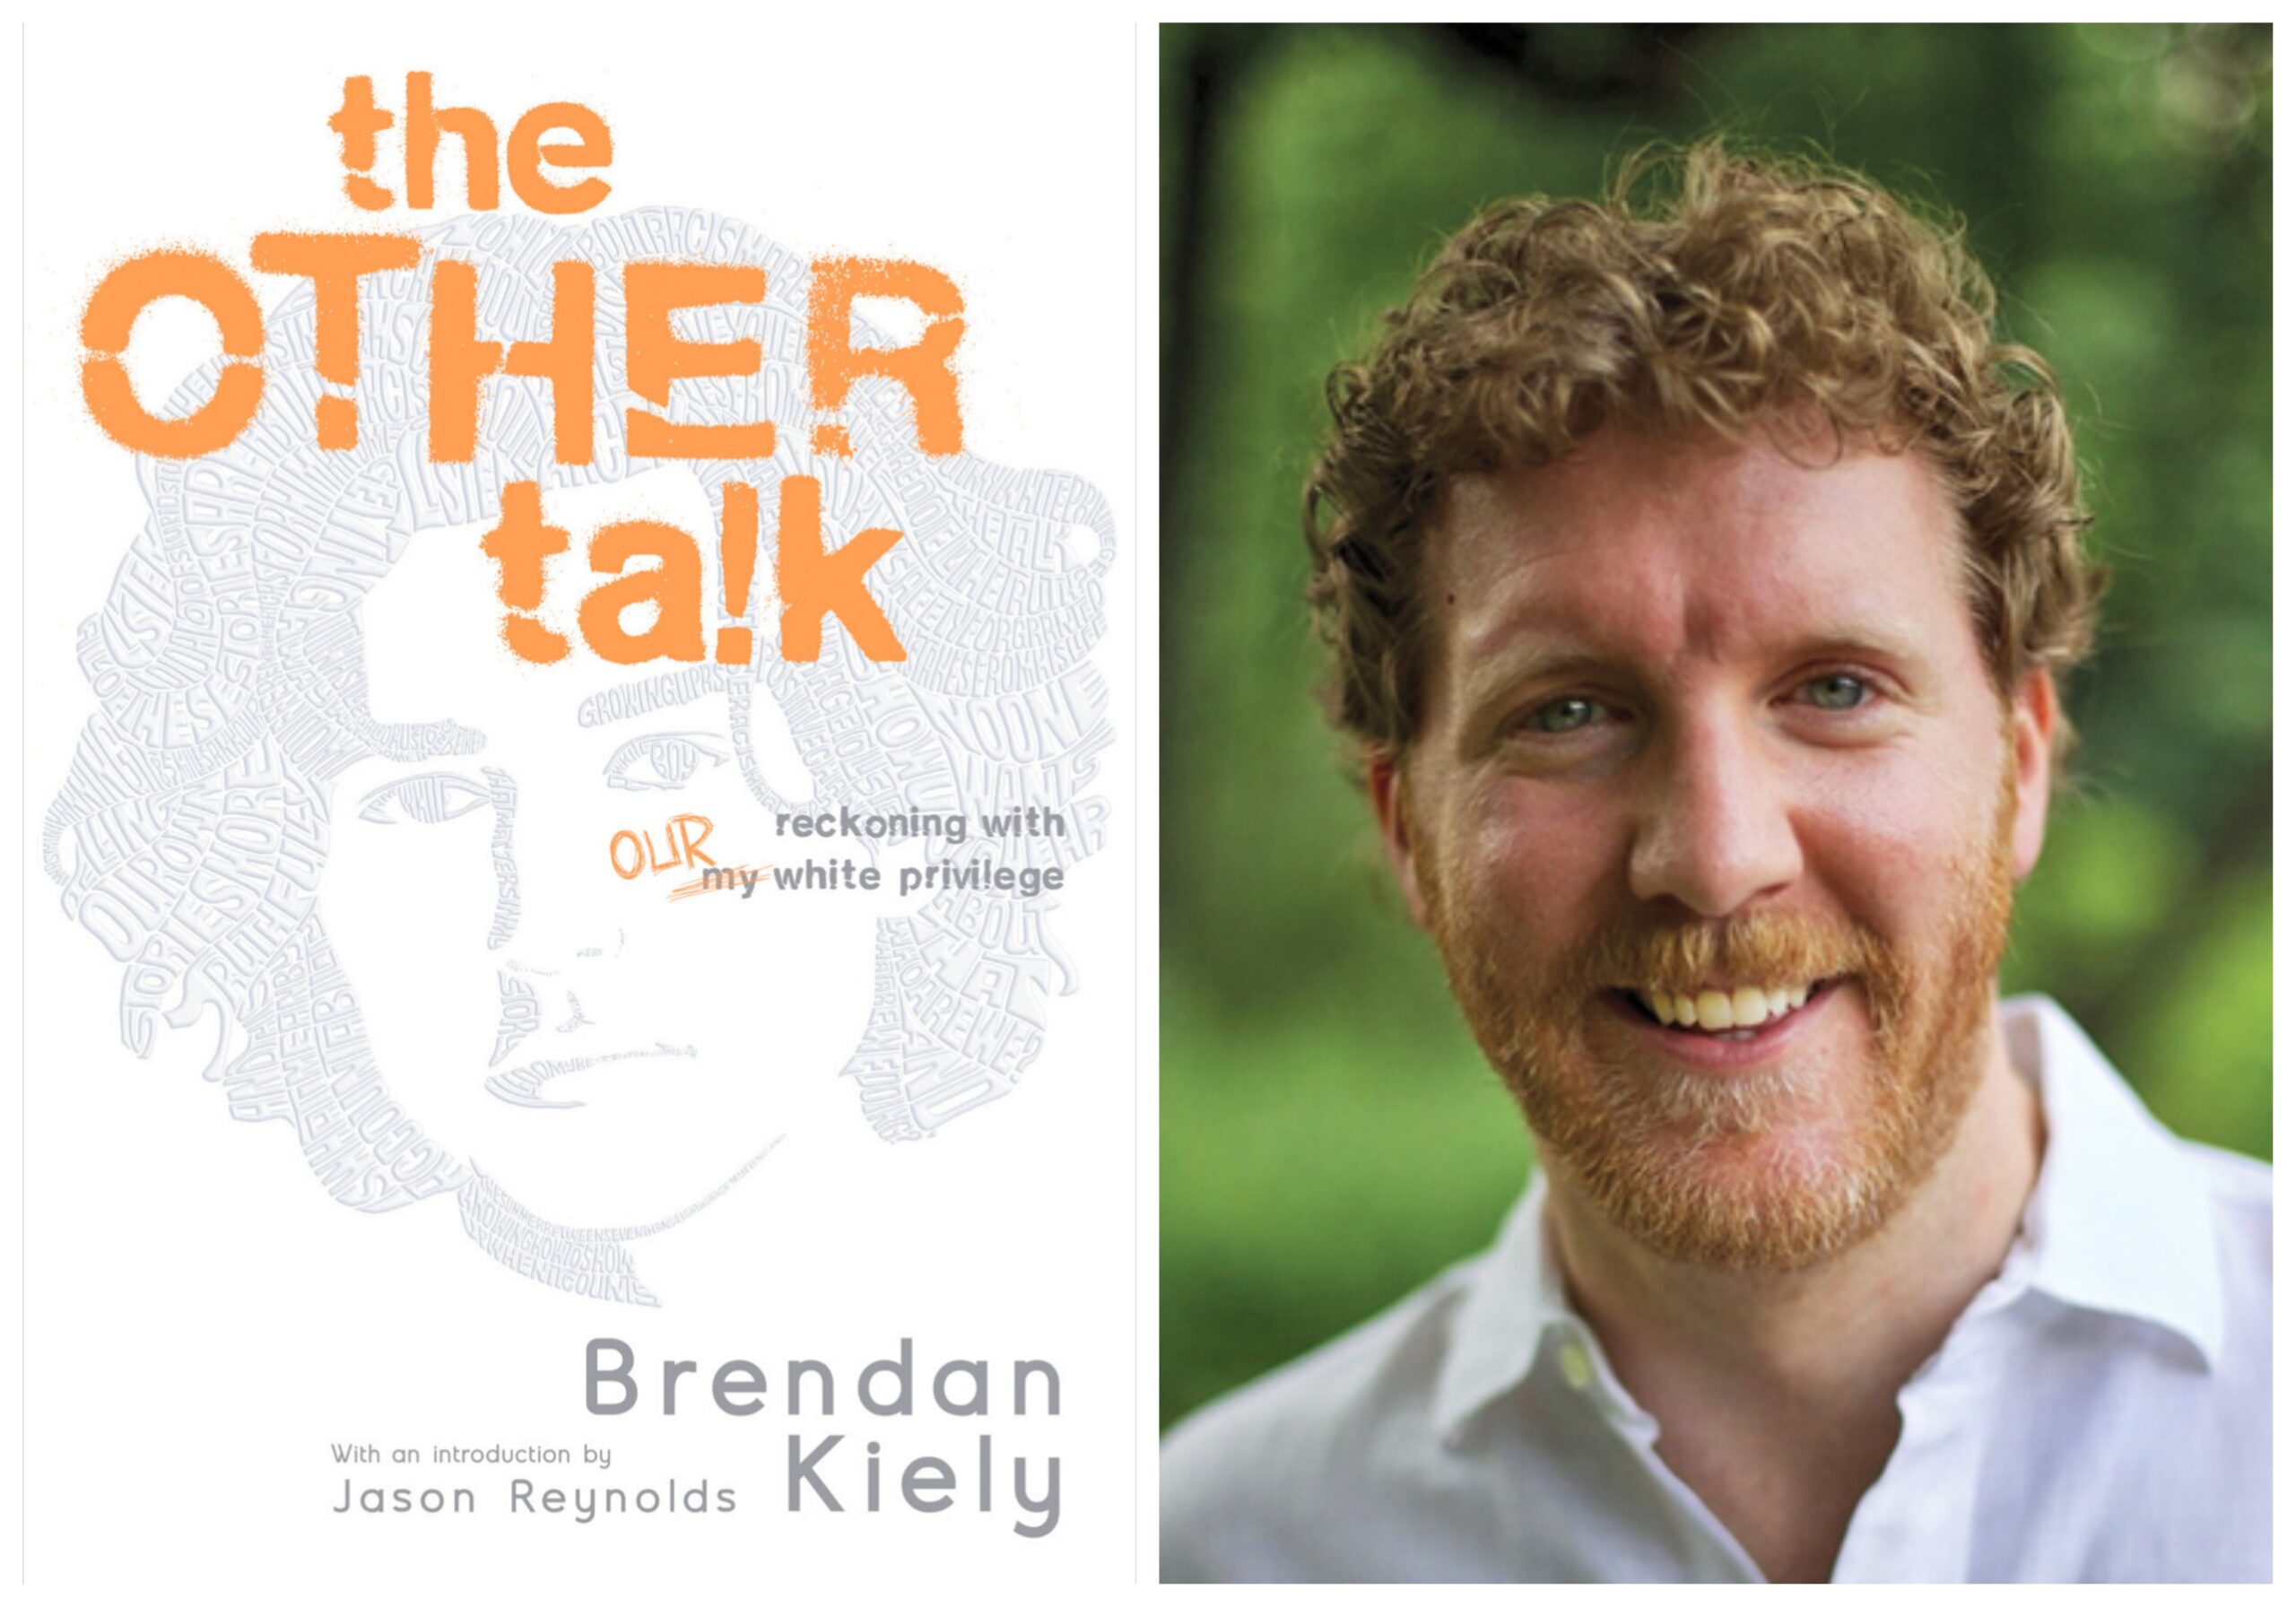 Author Brendan Kiely and the cover of his new book, "The Other Talk: Reckoning with Our White Privilege."